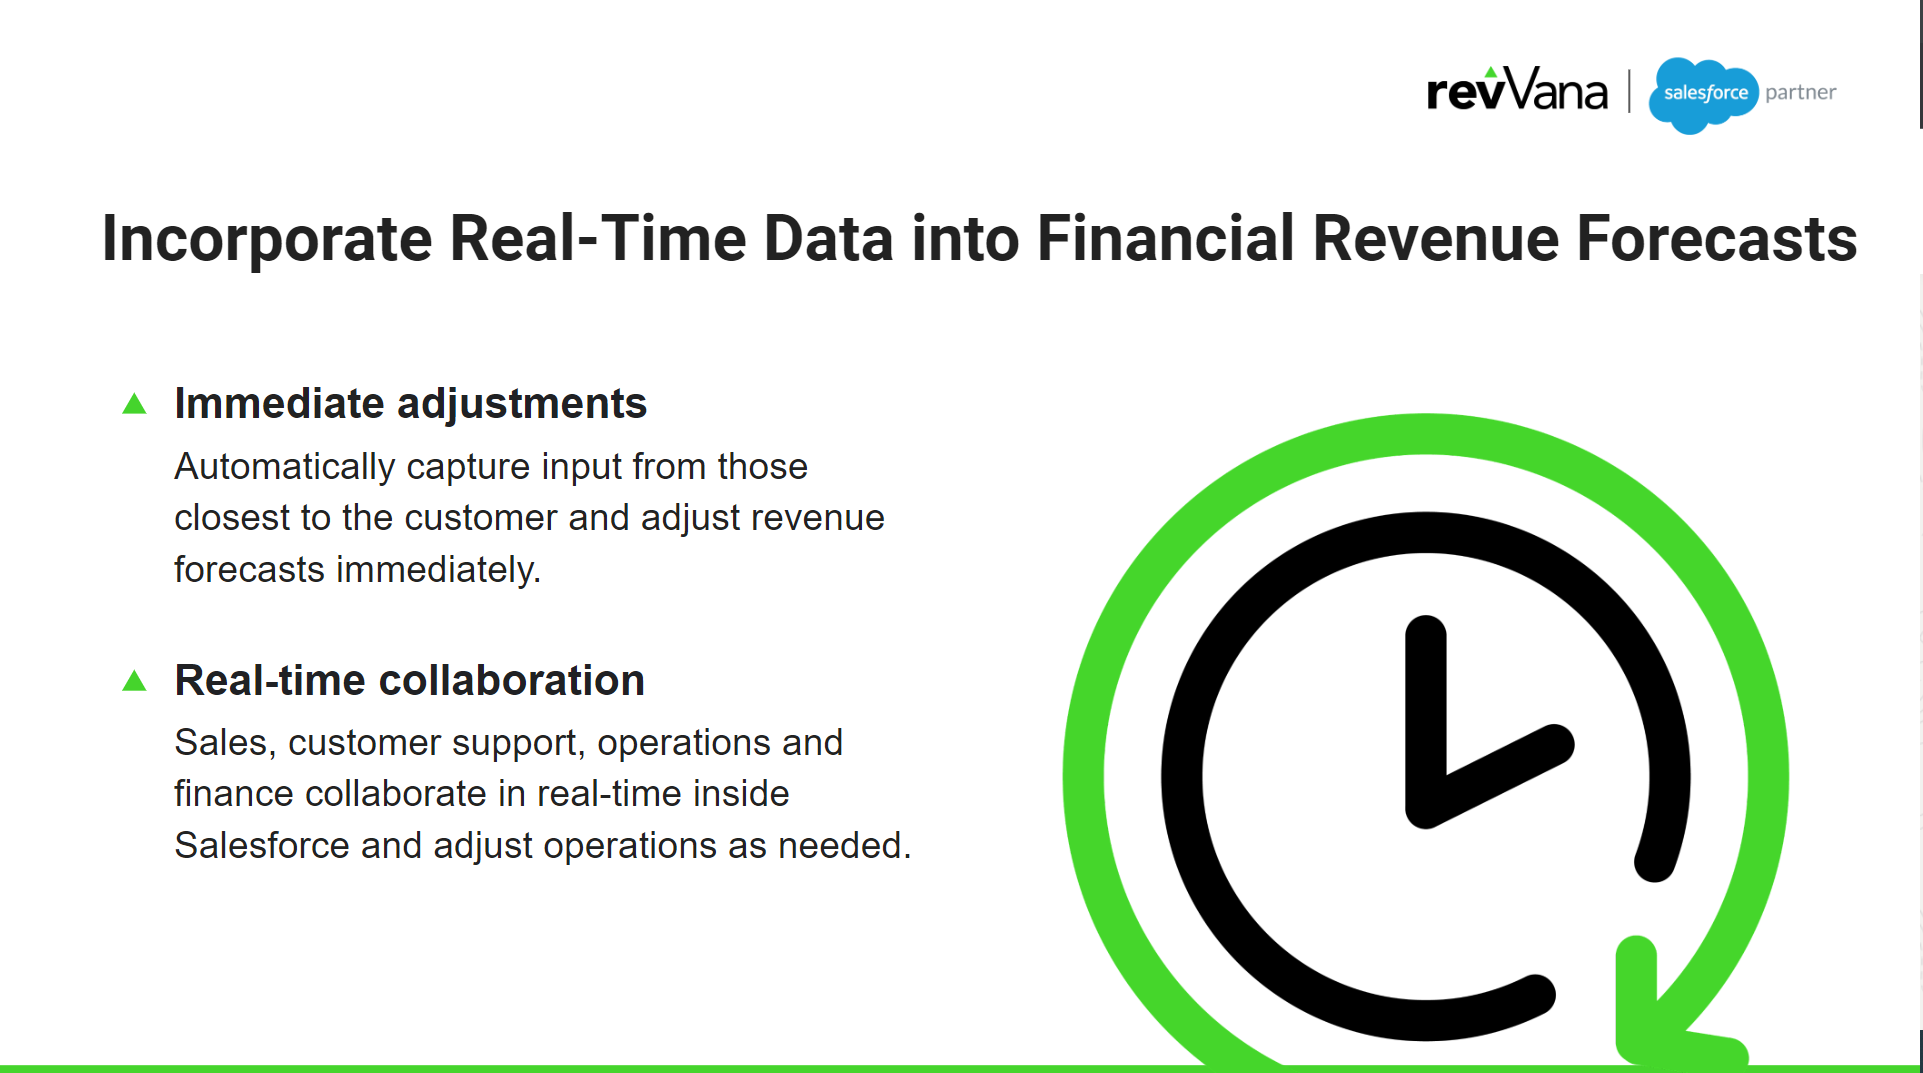 Incorporate Real-Time Data into Financial Revenue Forecasts